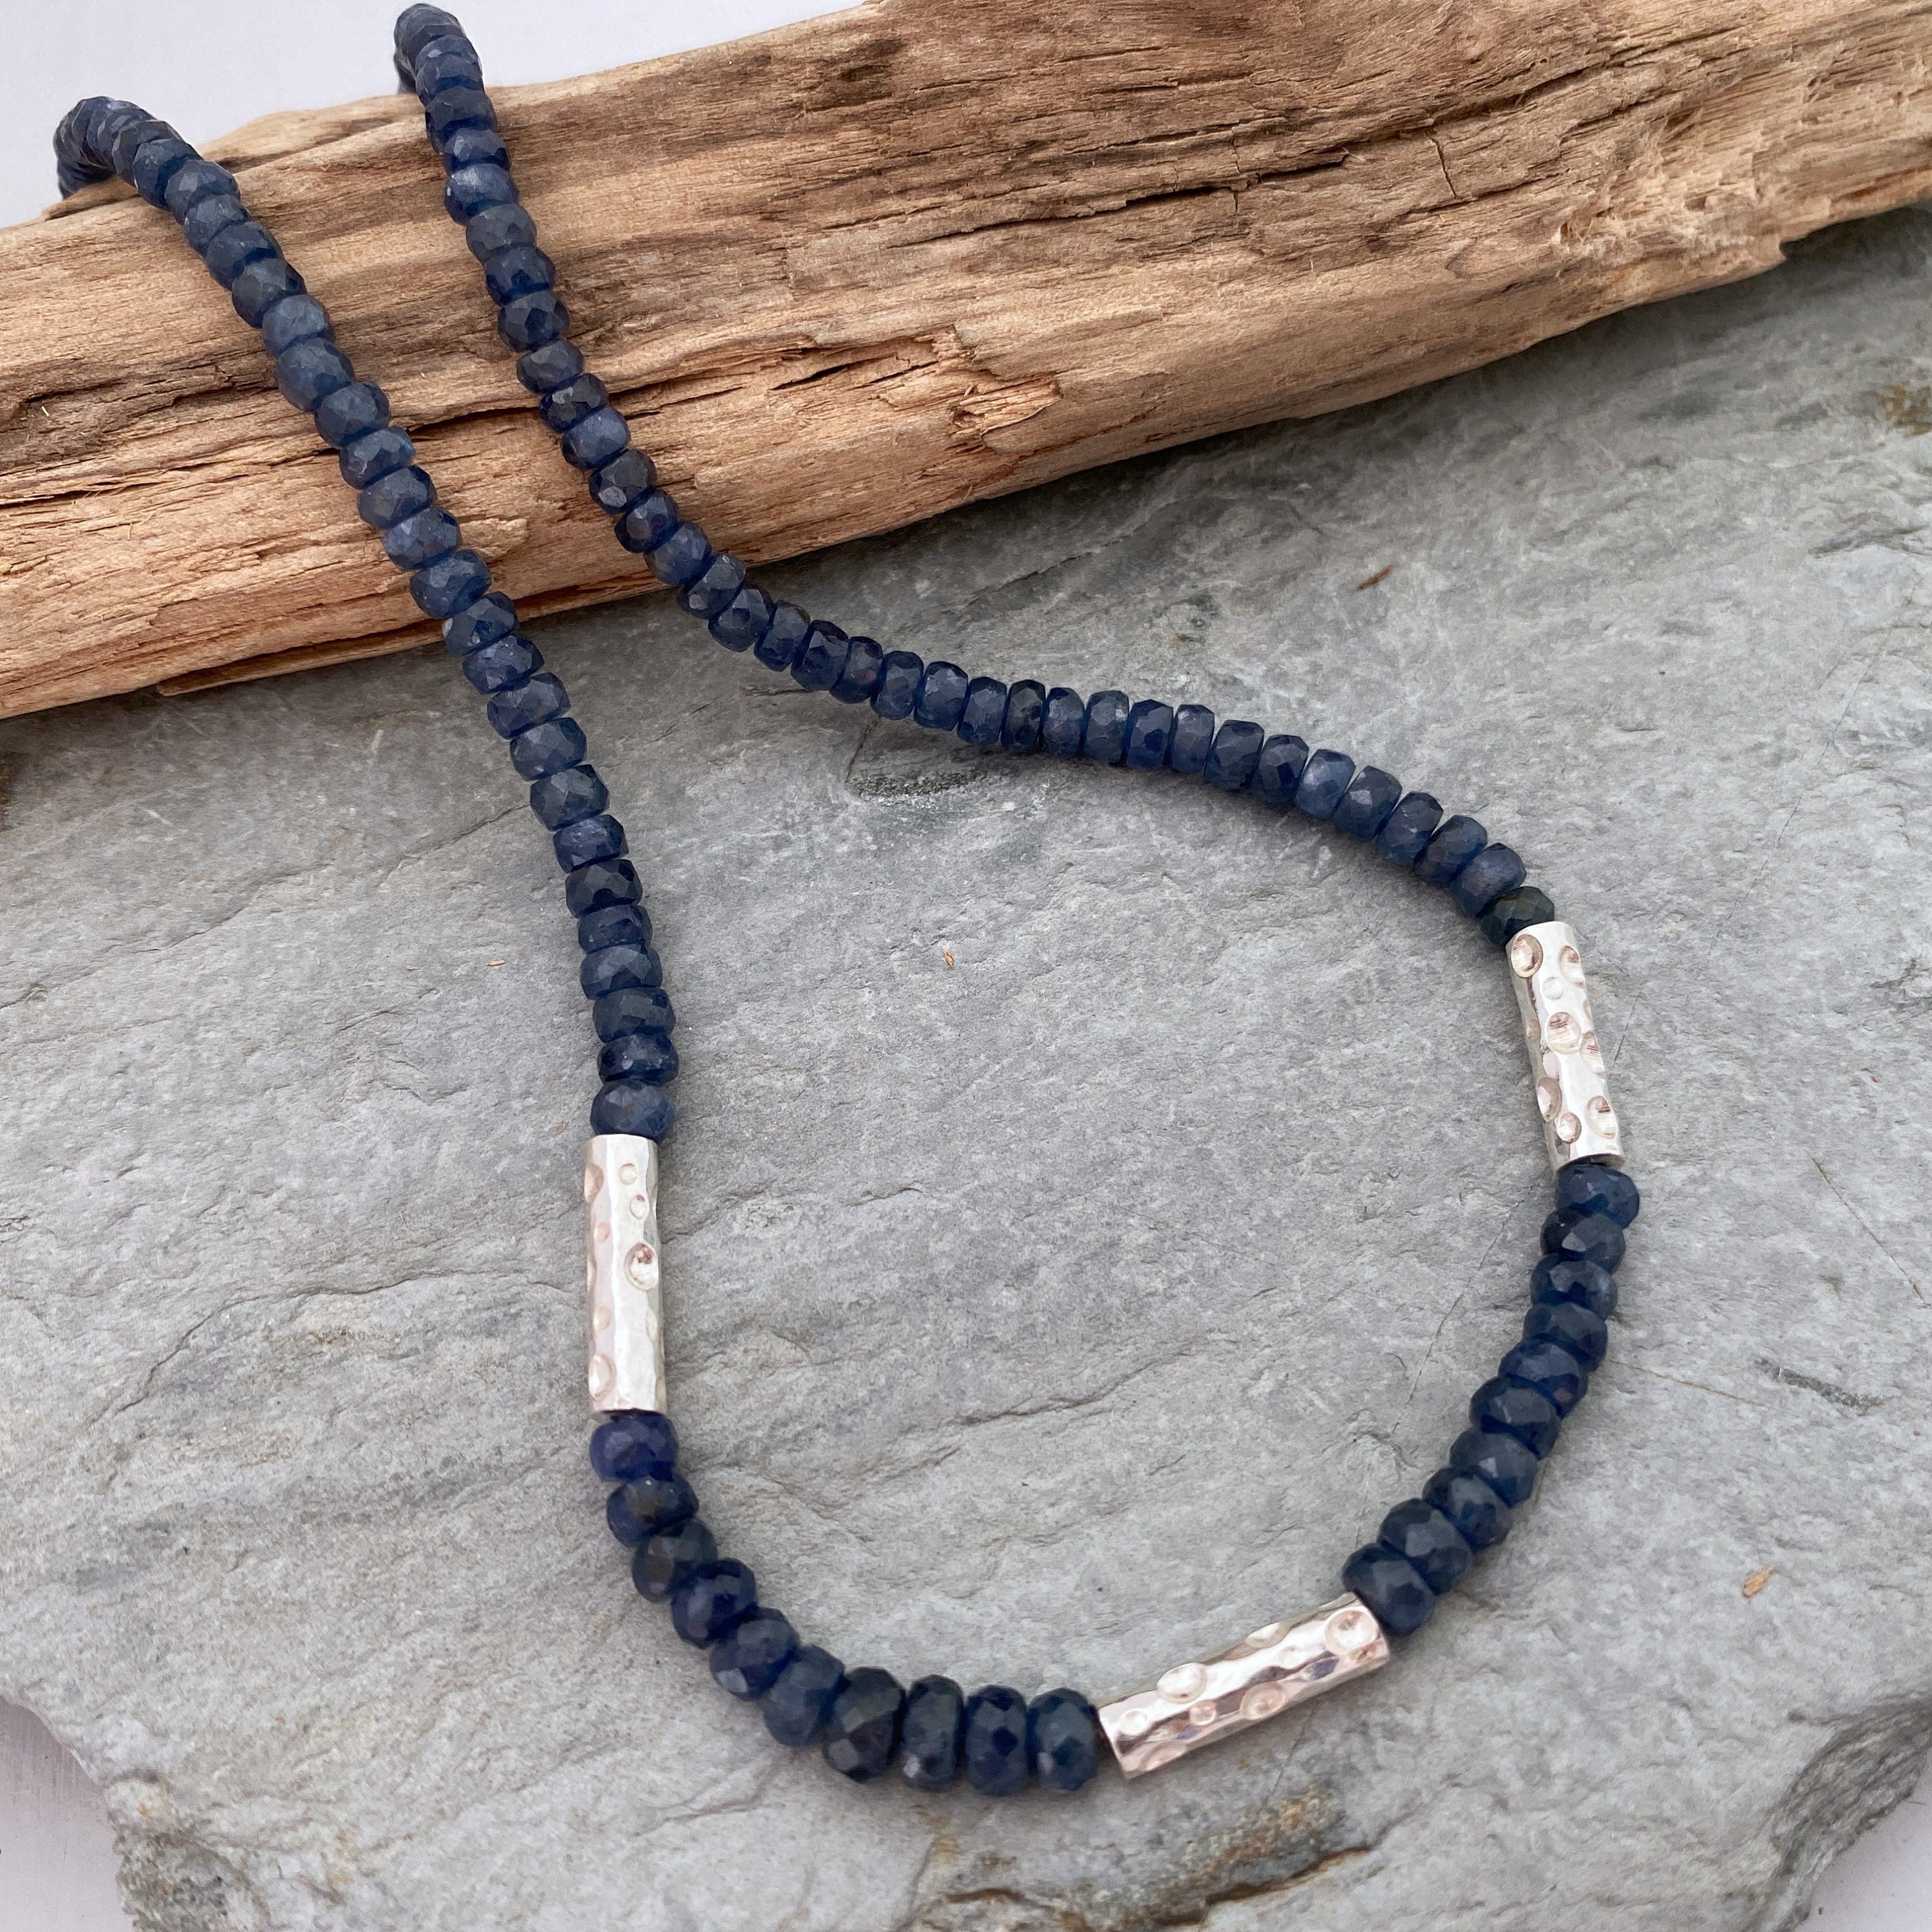 Blue Sapphire Necklace With Handmade Silver Beads. Unique & Necklace, One Of A Kind Bead Necklace